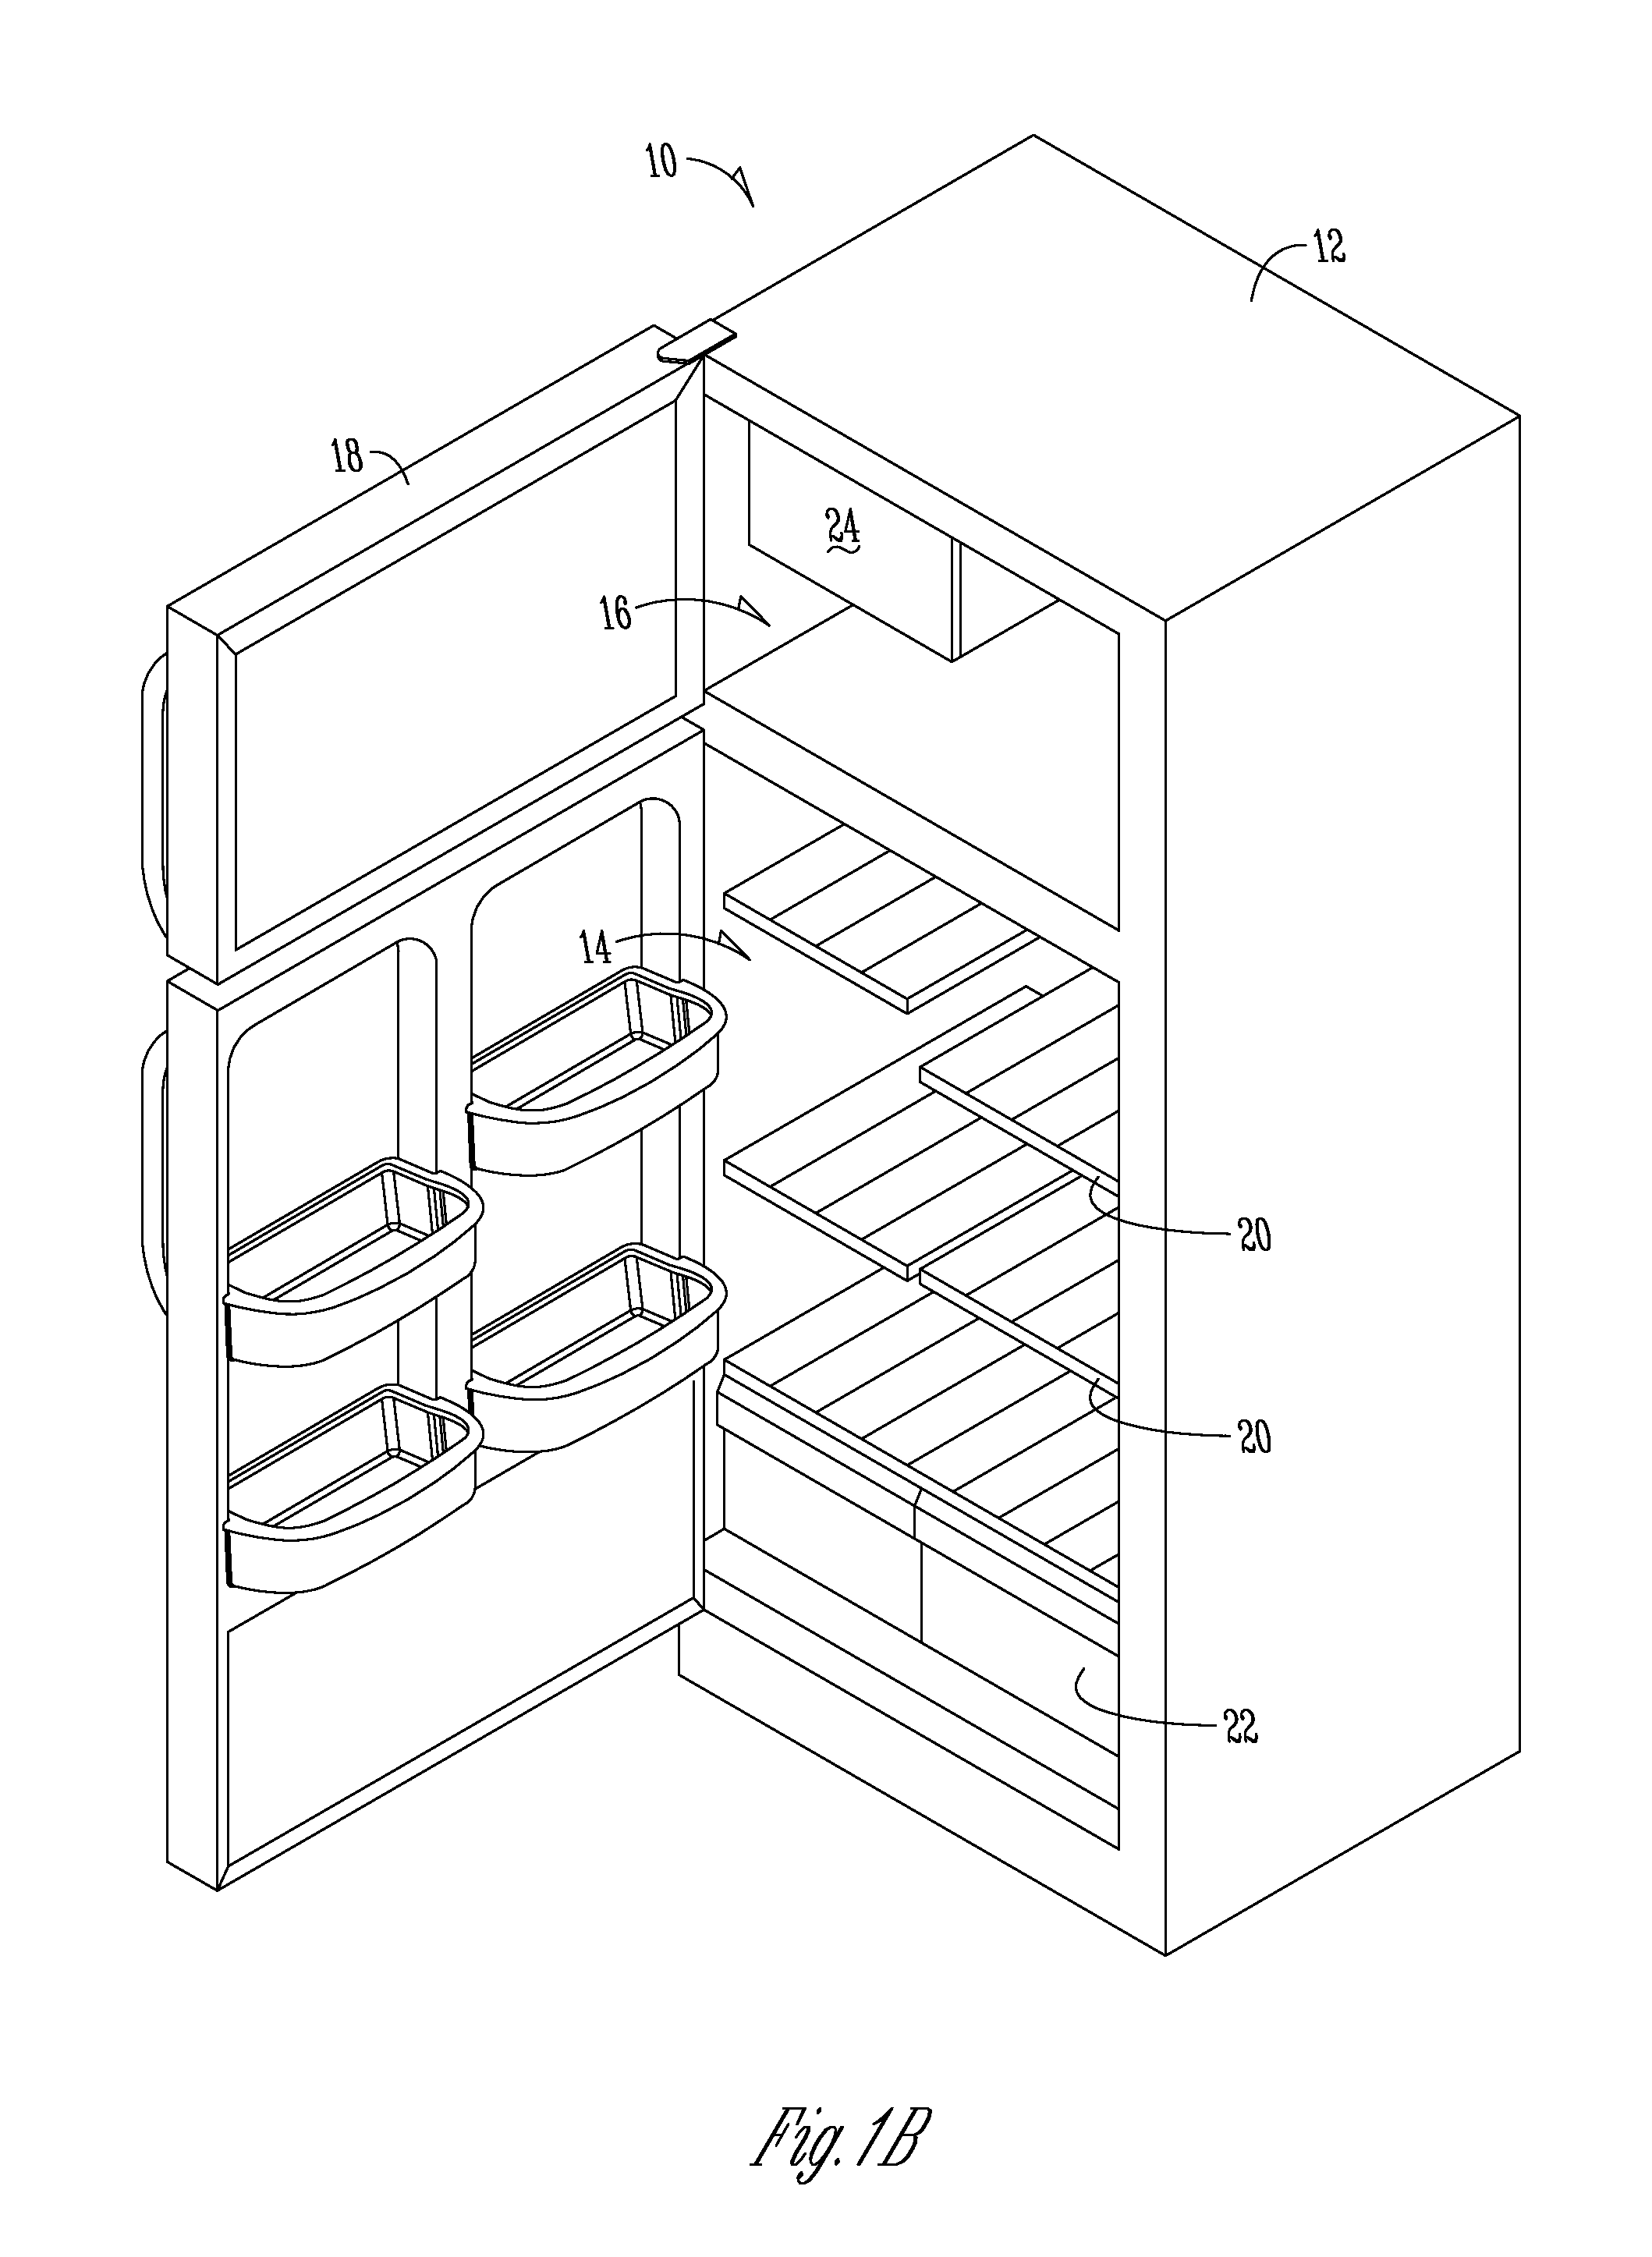 Defrost chamber within freezer compartment